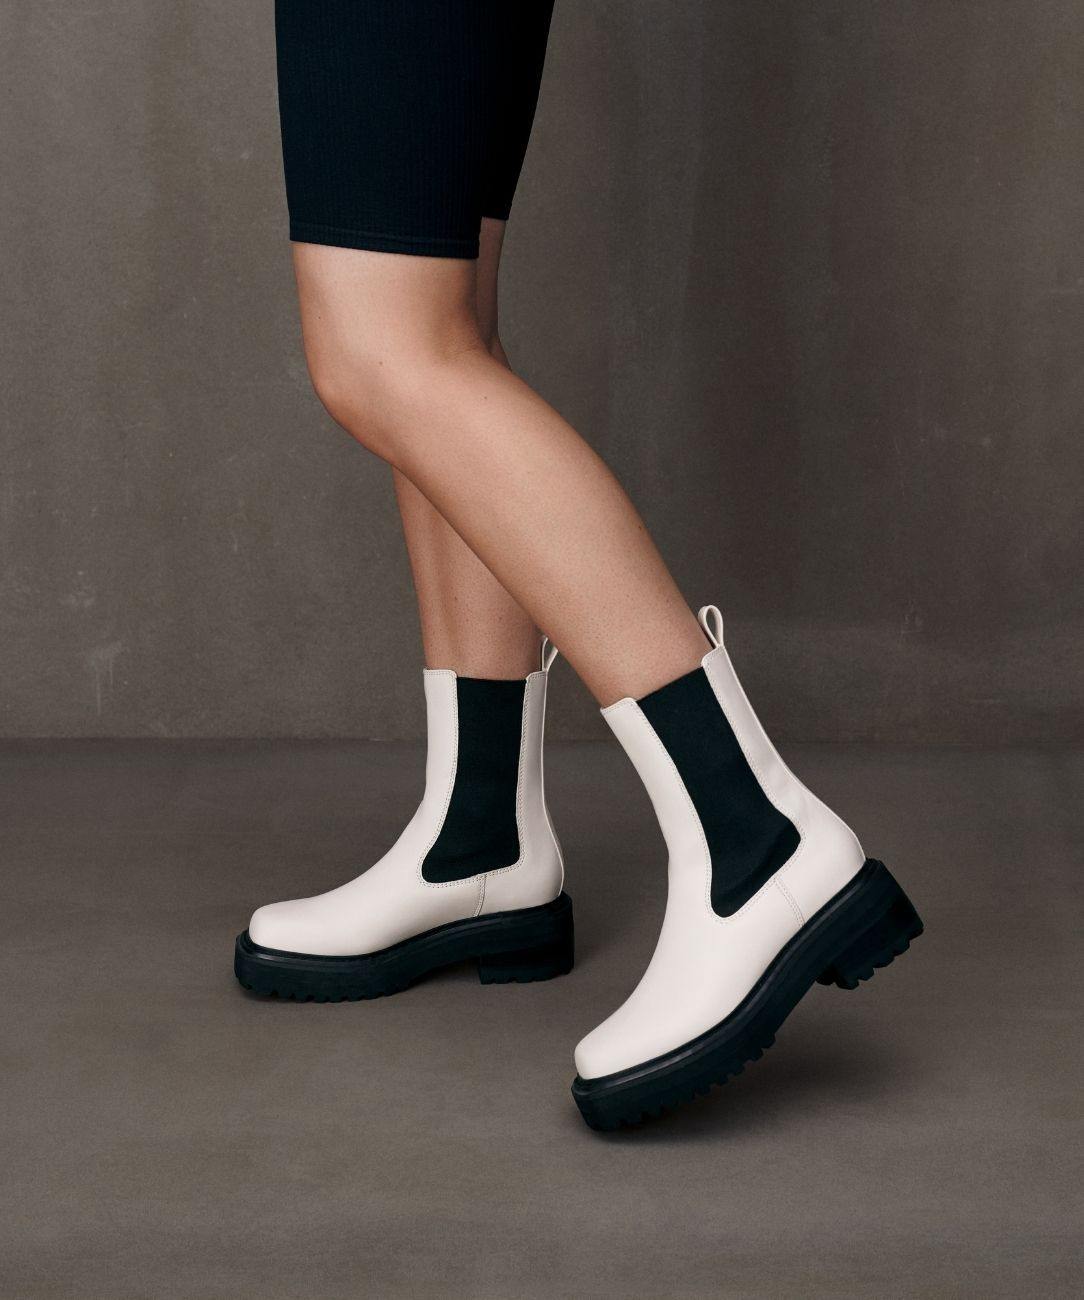 Therapy Shoes Yosemite Bone | Women's Boots | Ankle | Chunky | 90's